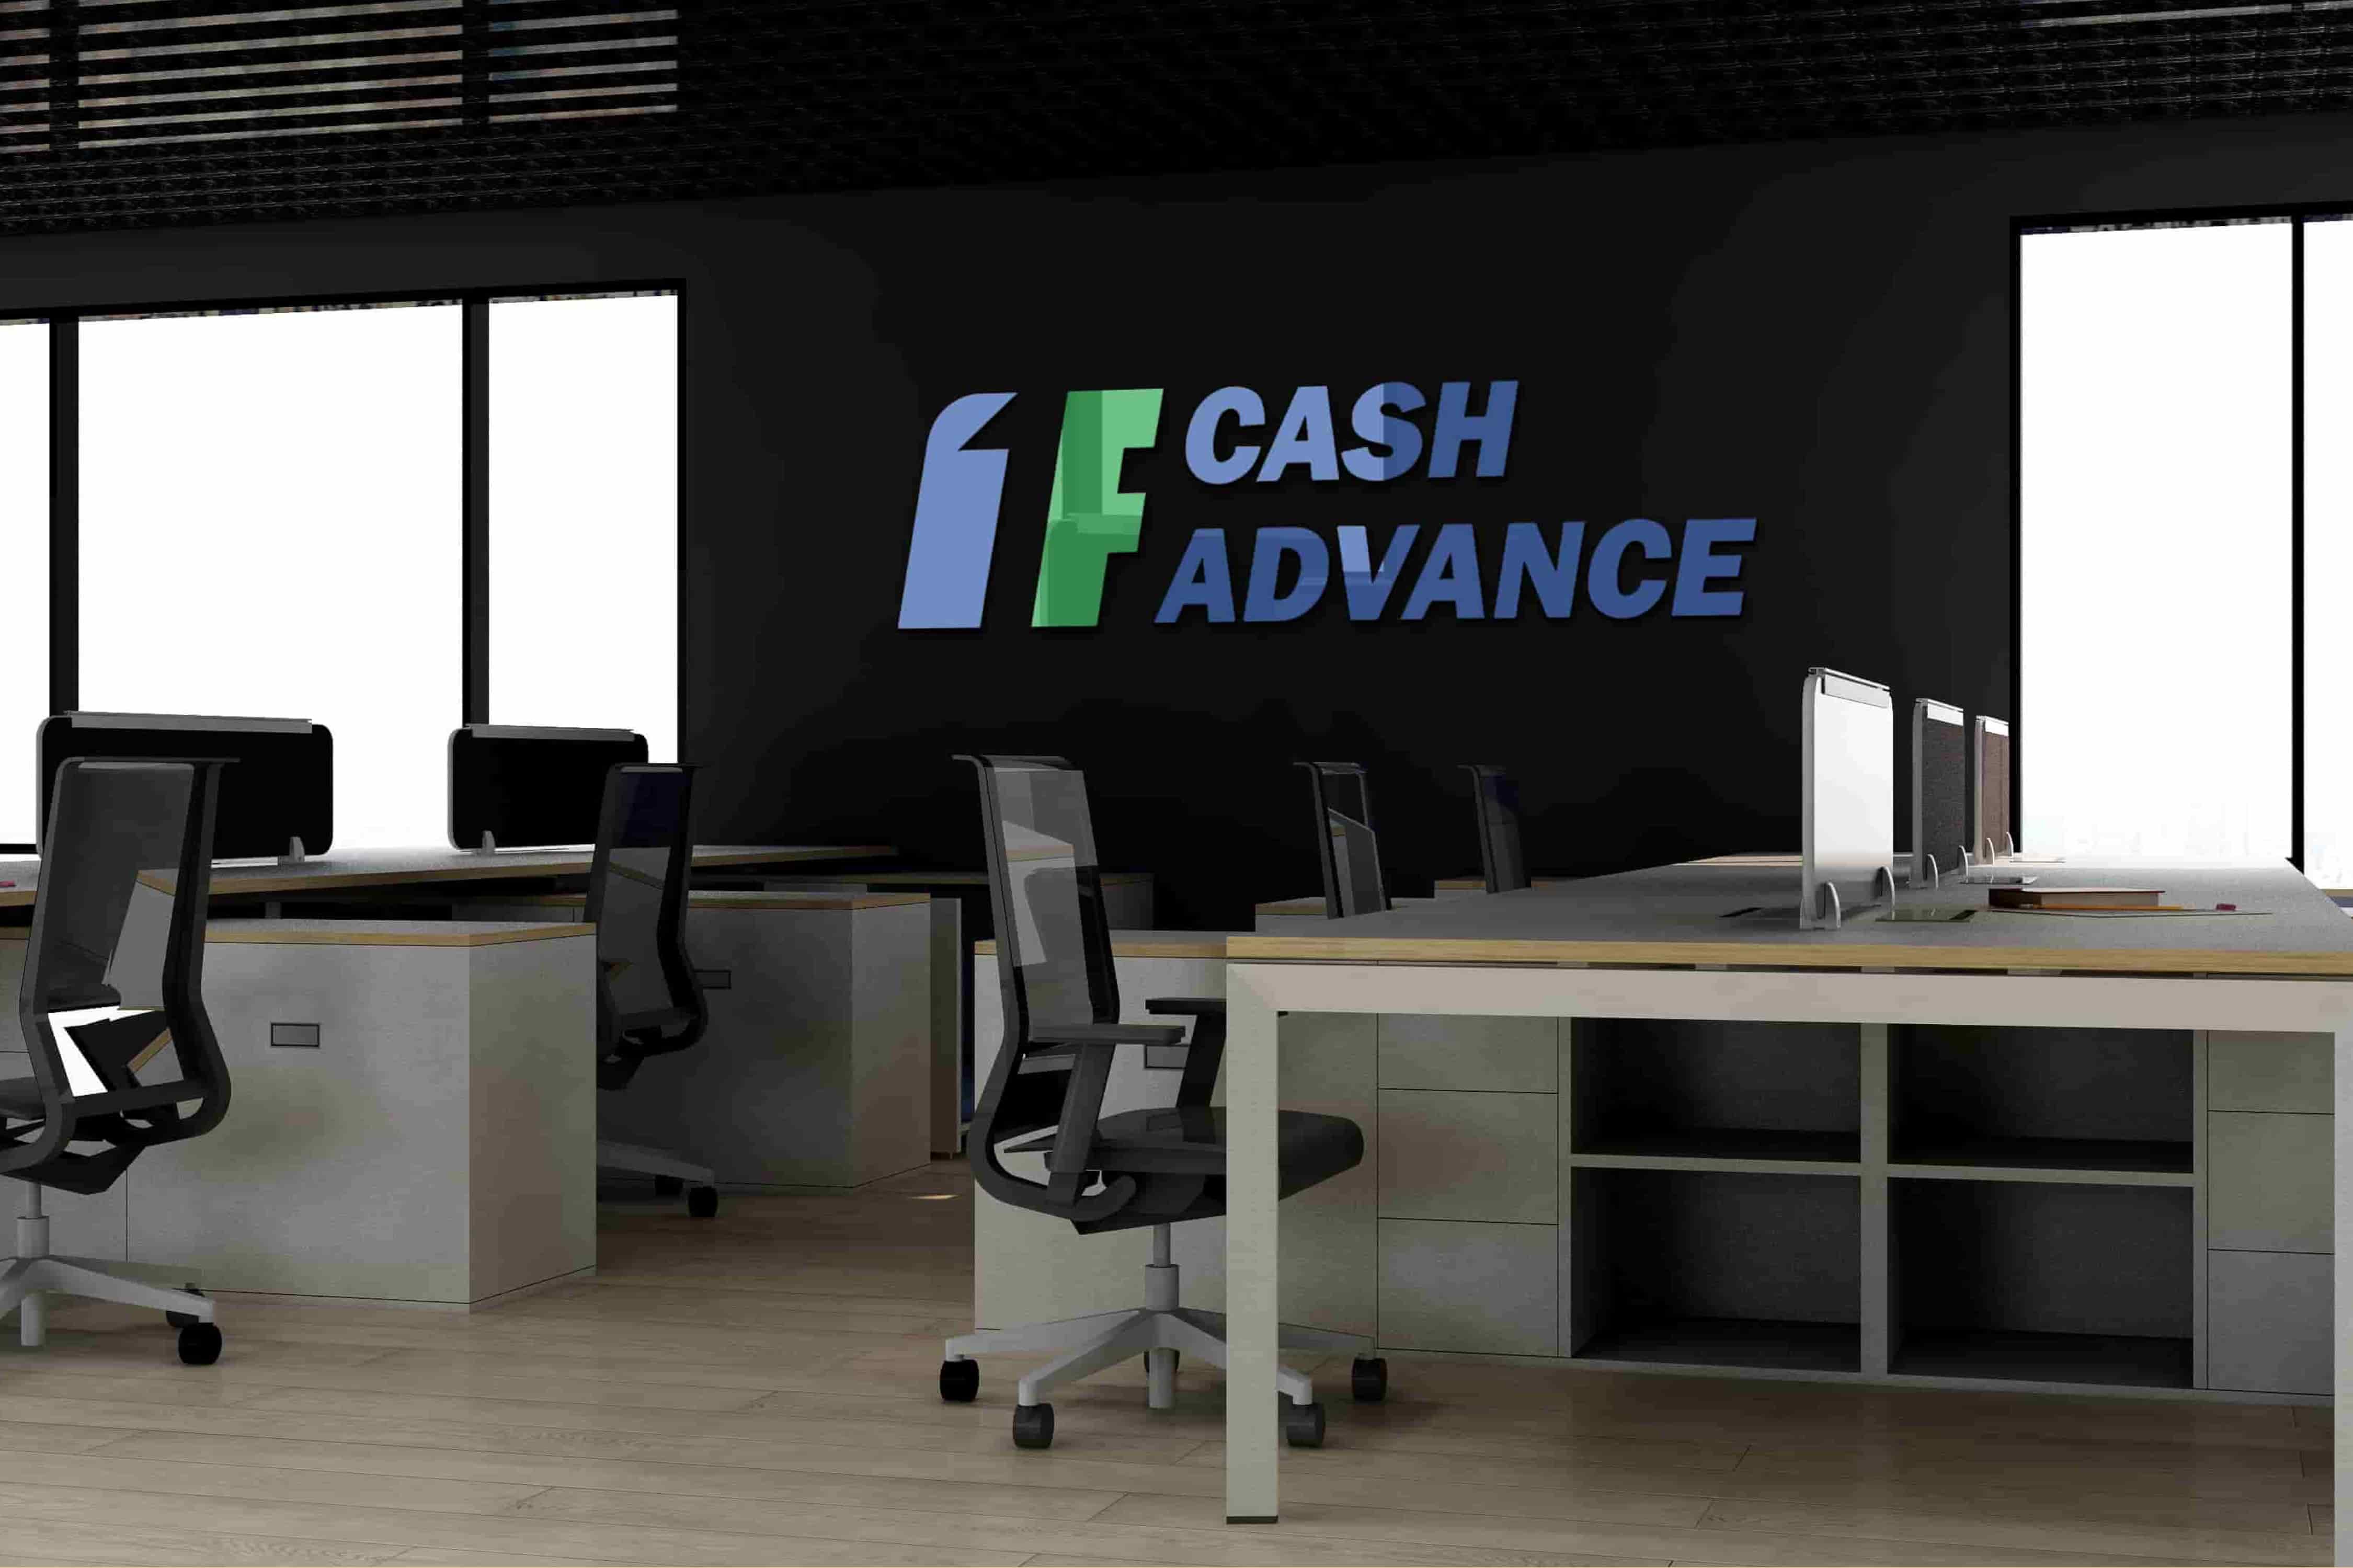 1F Cash Advance payday loans in Pittsburgh, PA